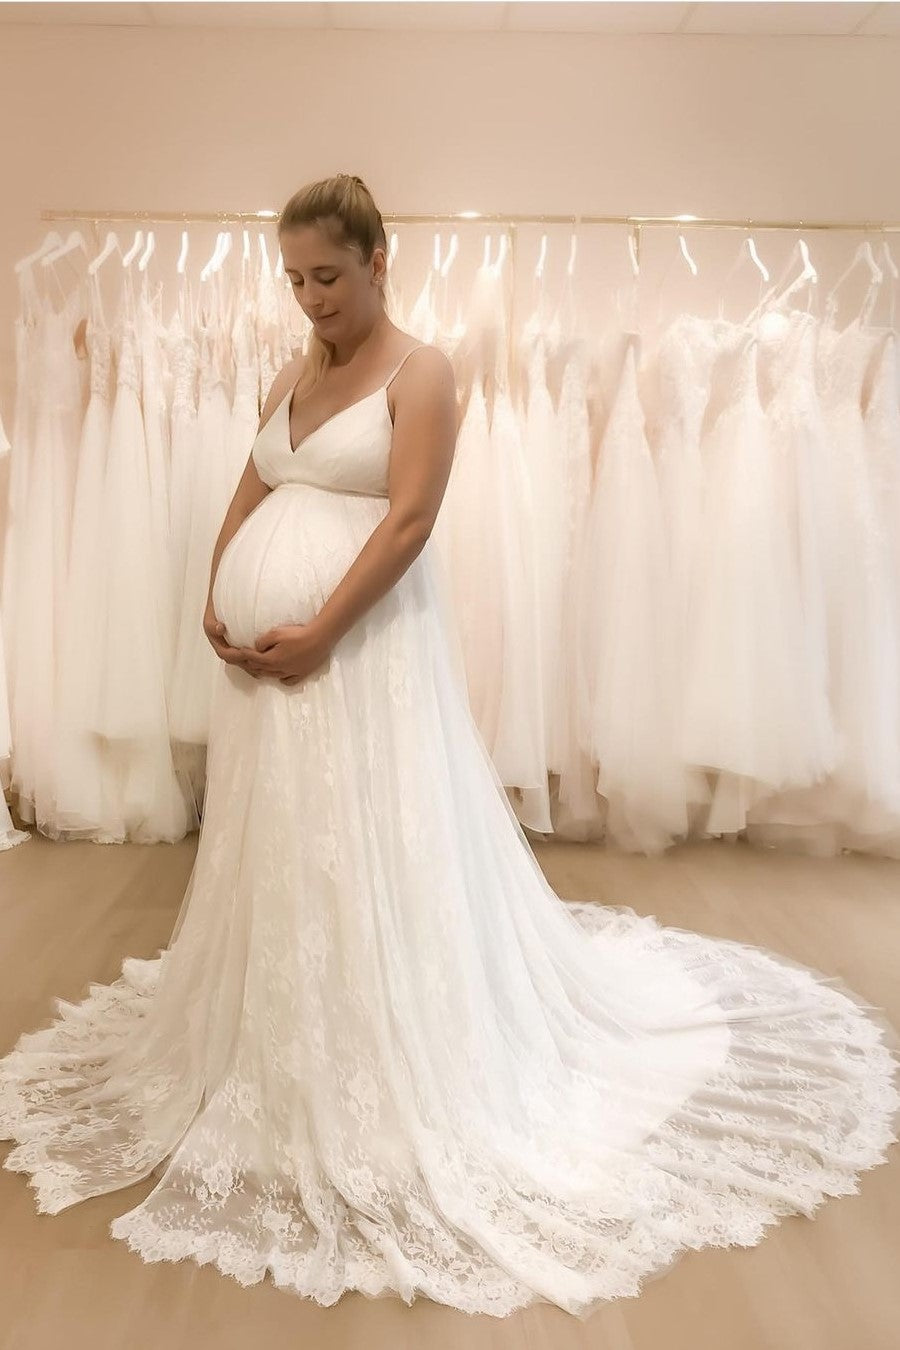 pregnant-woman-wedding-dress-with-lace-train